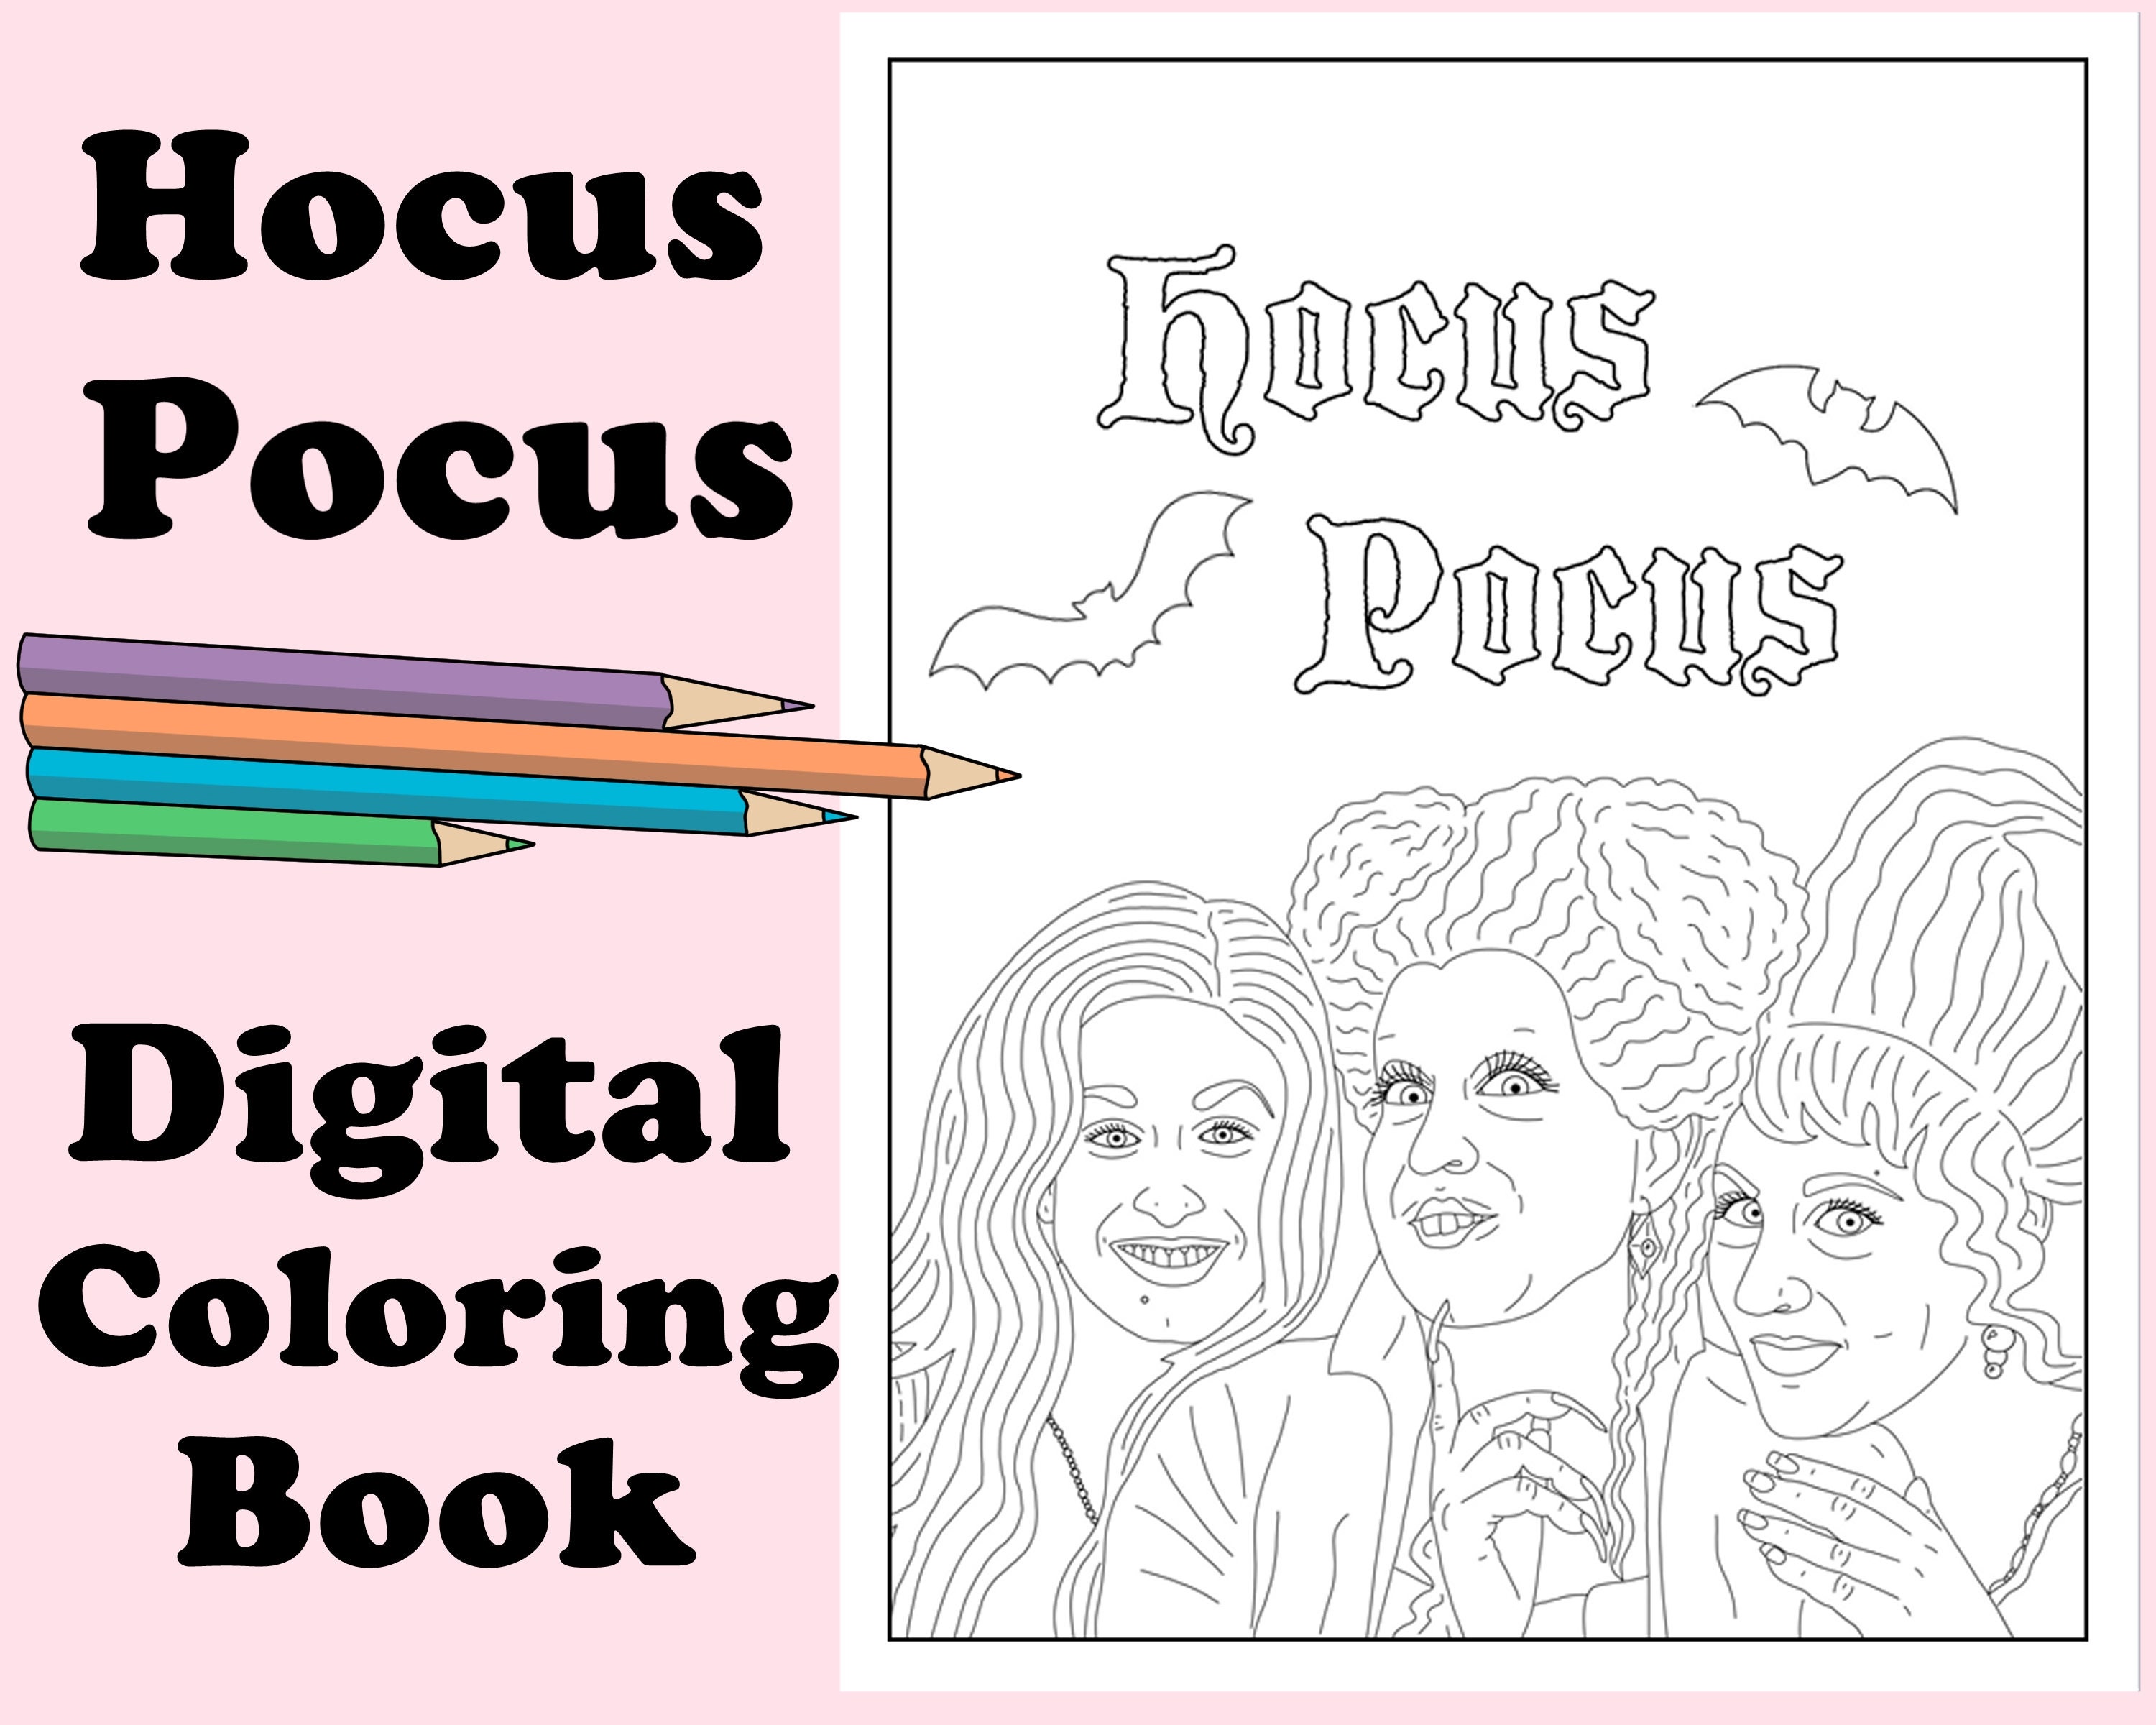 Hocus pocus digital coloring book instant printable pdf halloween activity rainy day art therapy coloring page party fun witches